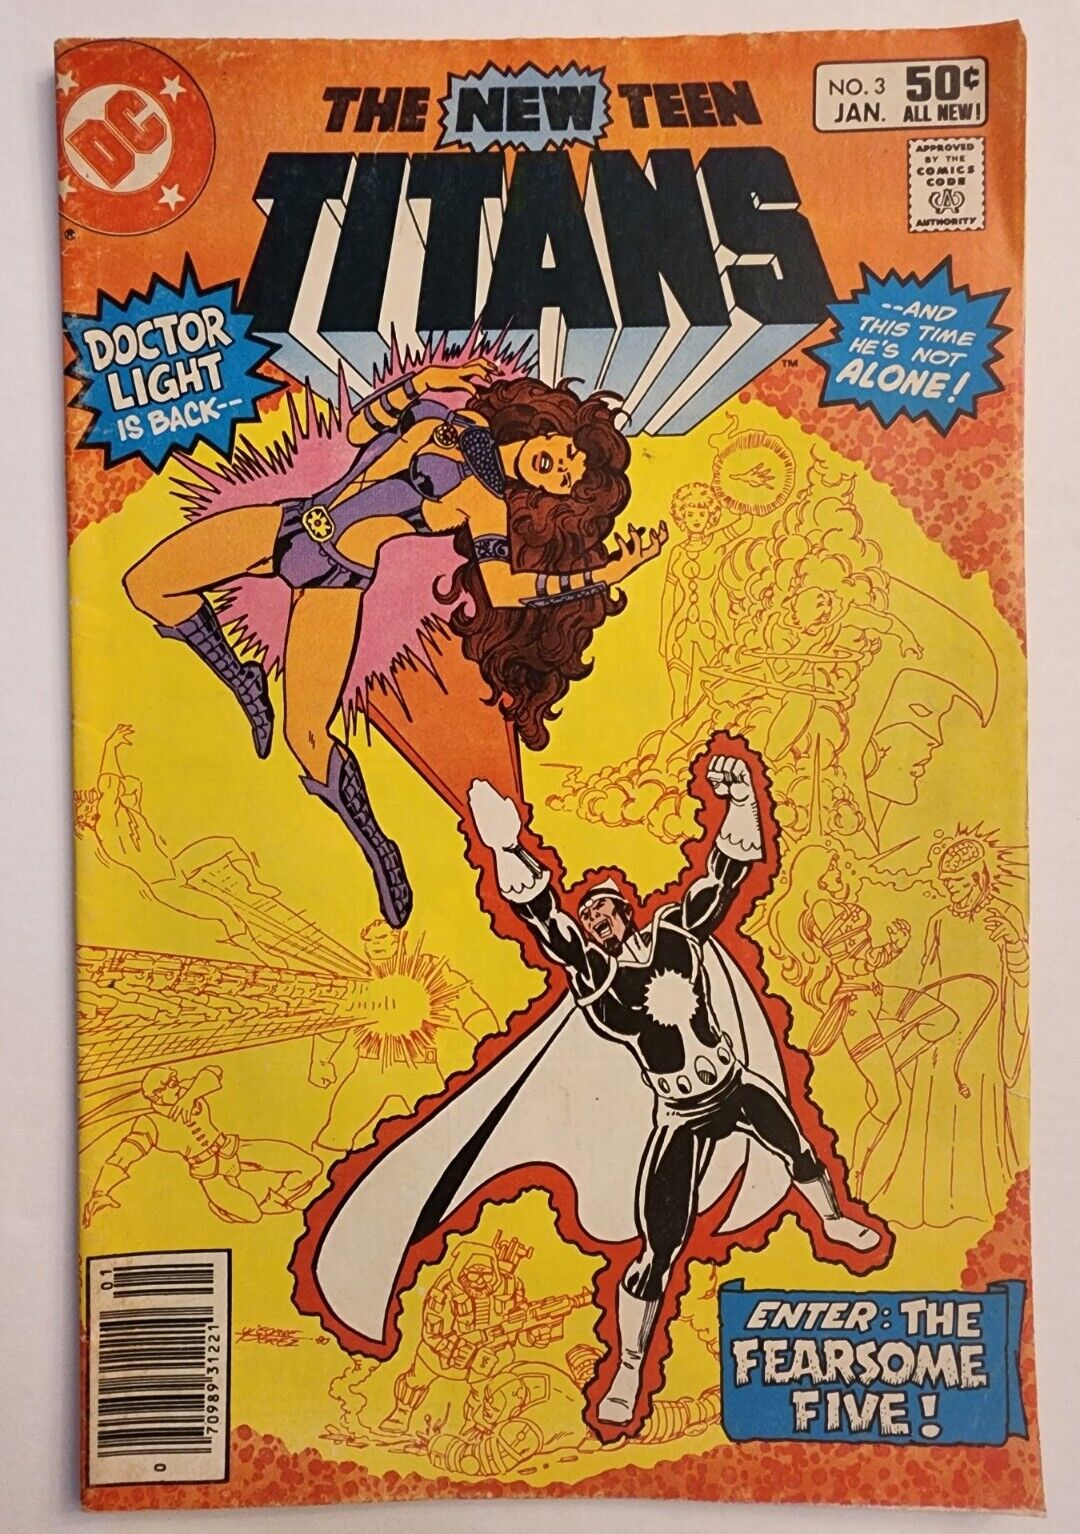 The New Teen Titans #3 Newsstand Edition The Fearsome Five DC Comics 1981 F/VF